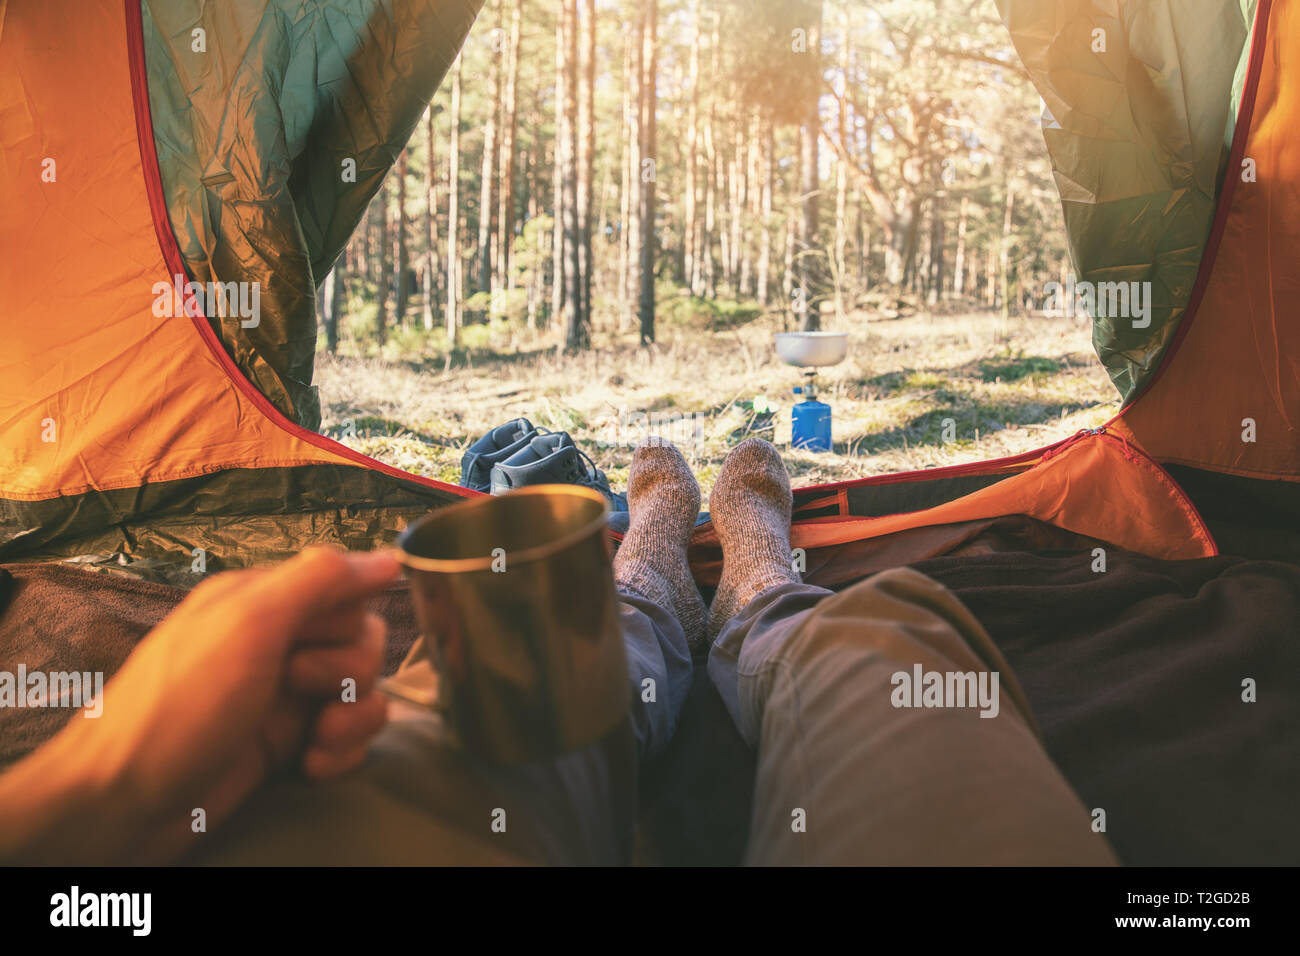 outdoor adventure tourism - man laying in tent with cup of tea Stock Photo